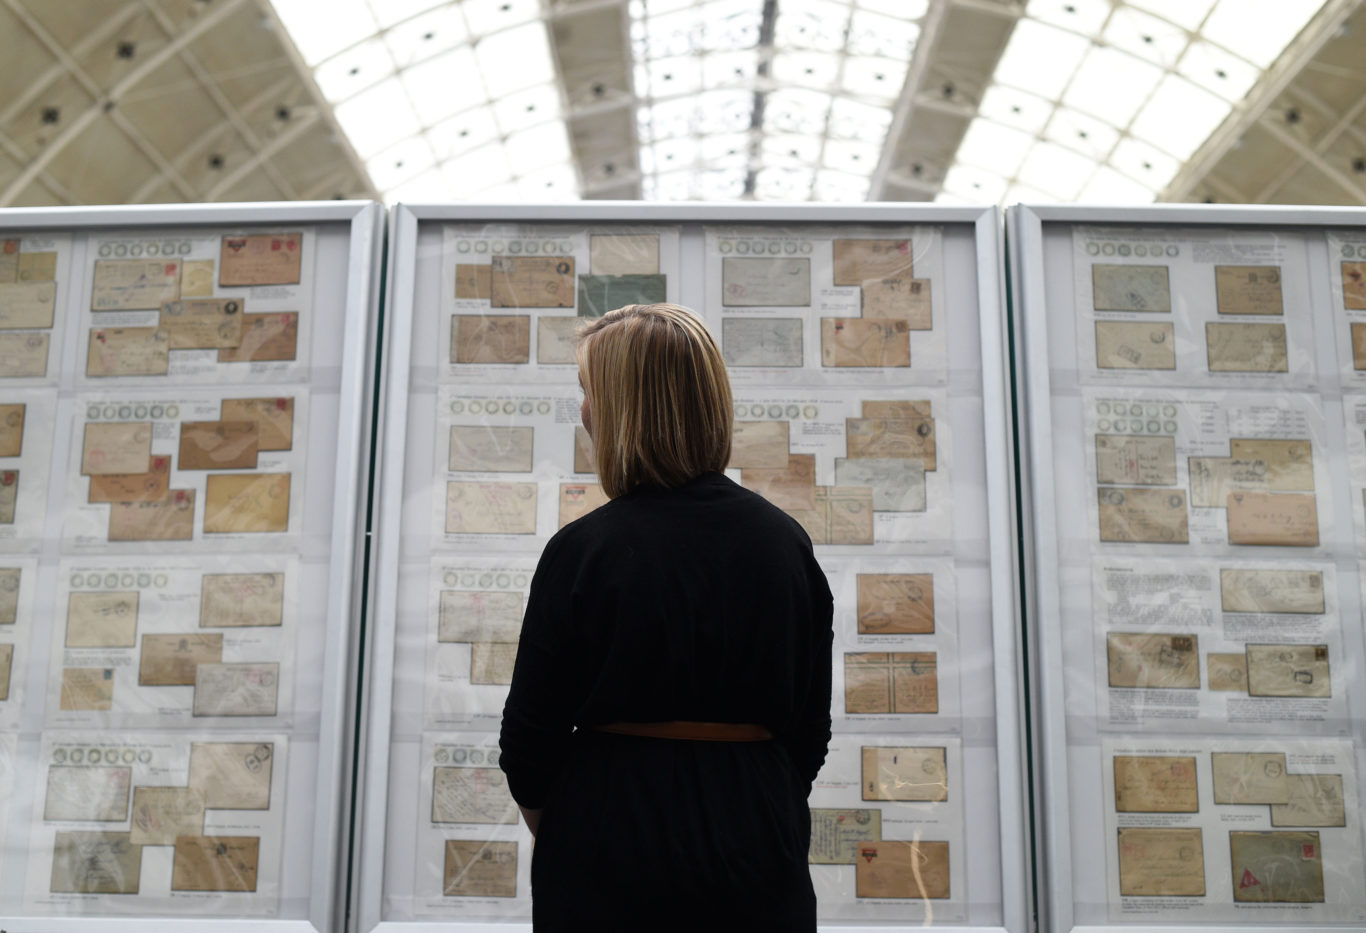 A visitor looks at a collection of envelopes and stamps during the Stampex philatelic exhibition (Kirsty O'Connor/PA)